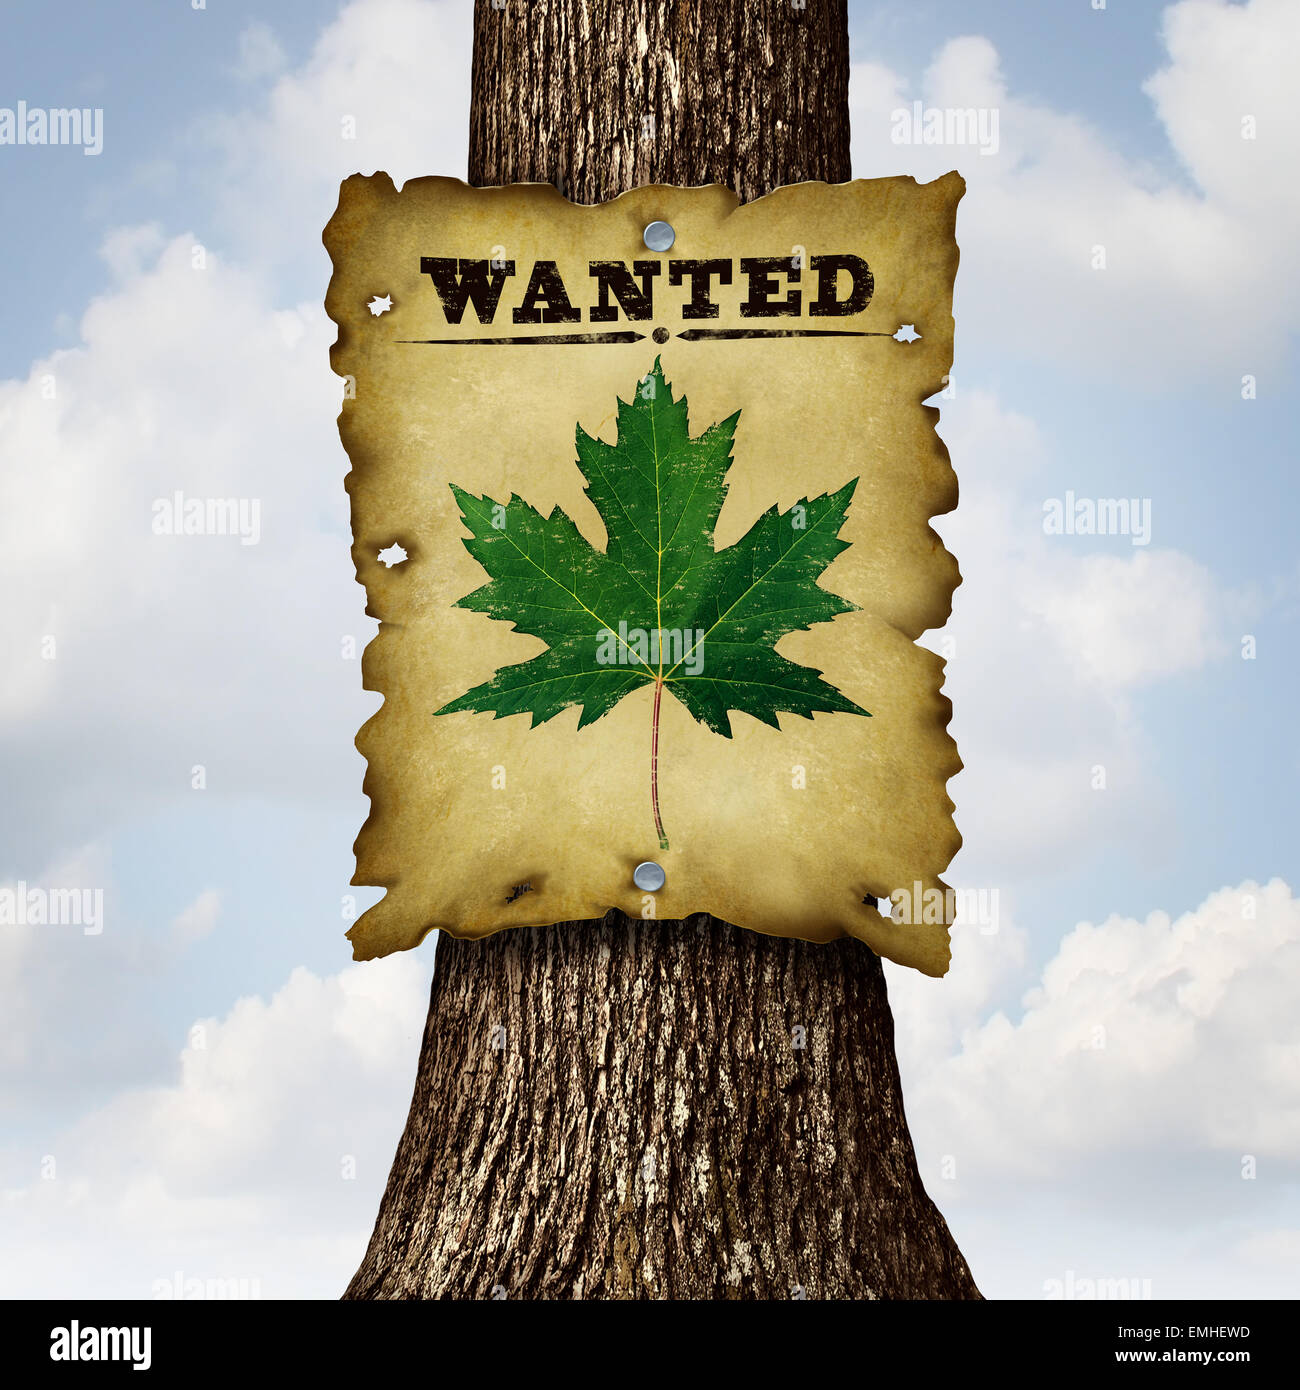 Environmentally Friendly green concept as a tree trunk and a wanted sign with a leaf as an ecology and conservation symbol or spring and springtime season icon. Stock Photo